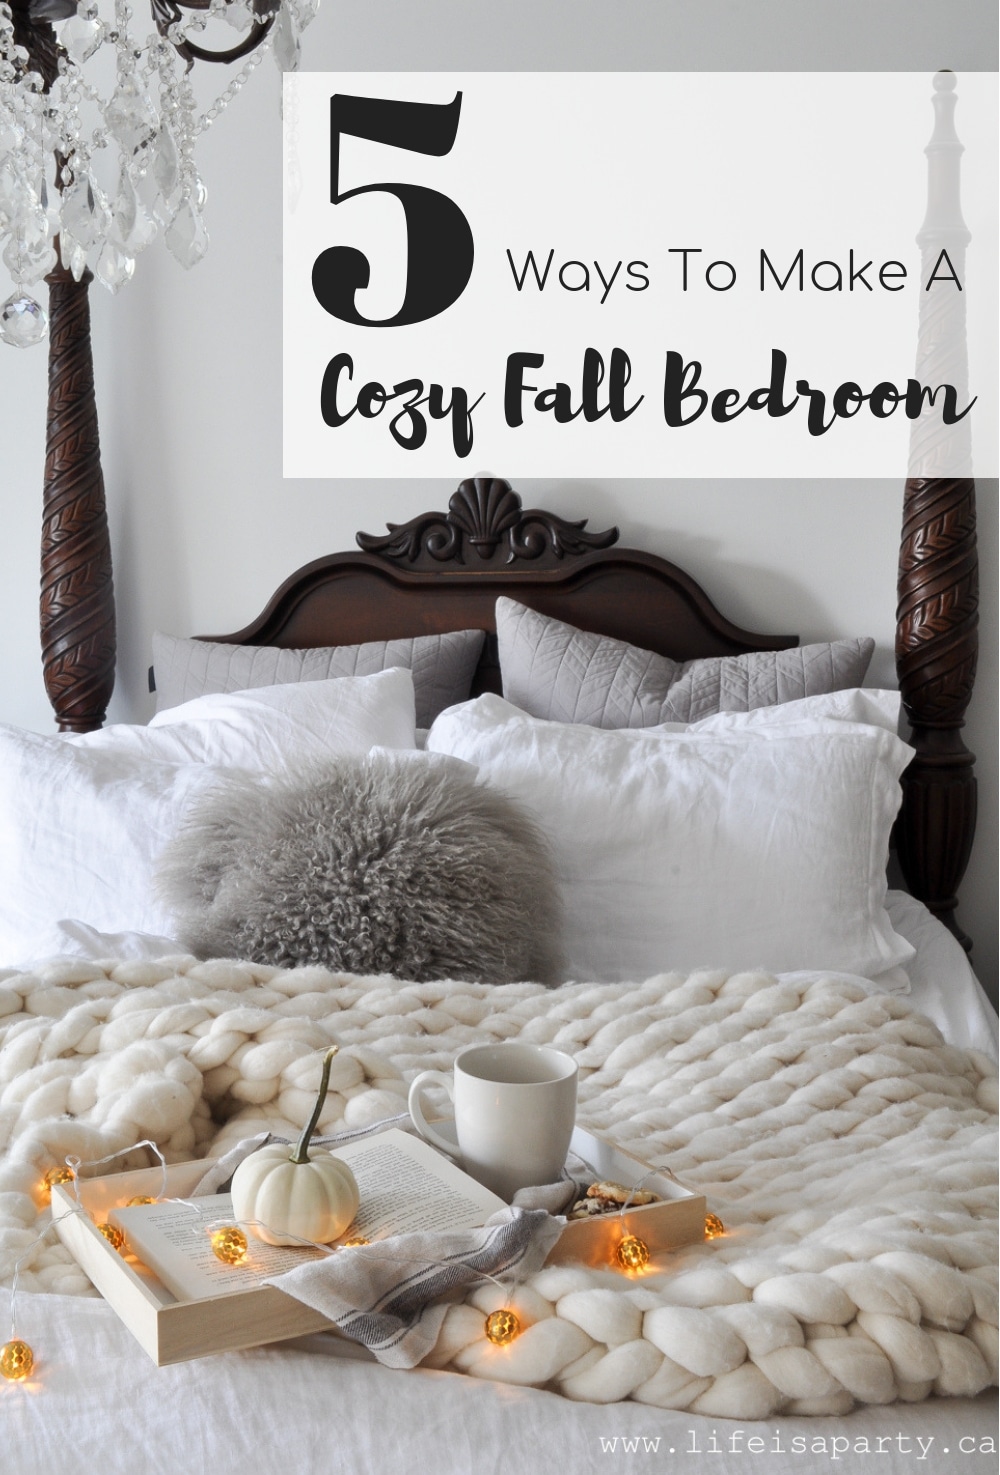 5 Ways To Make A Cozy Fall Bedroom